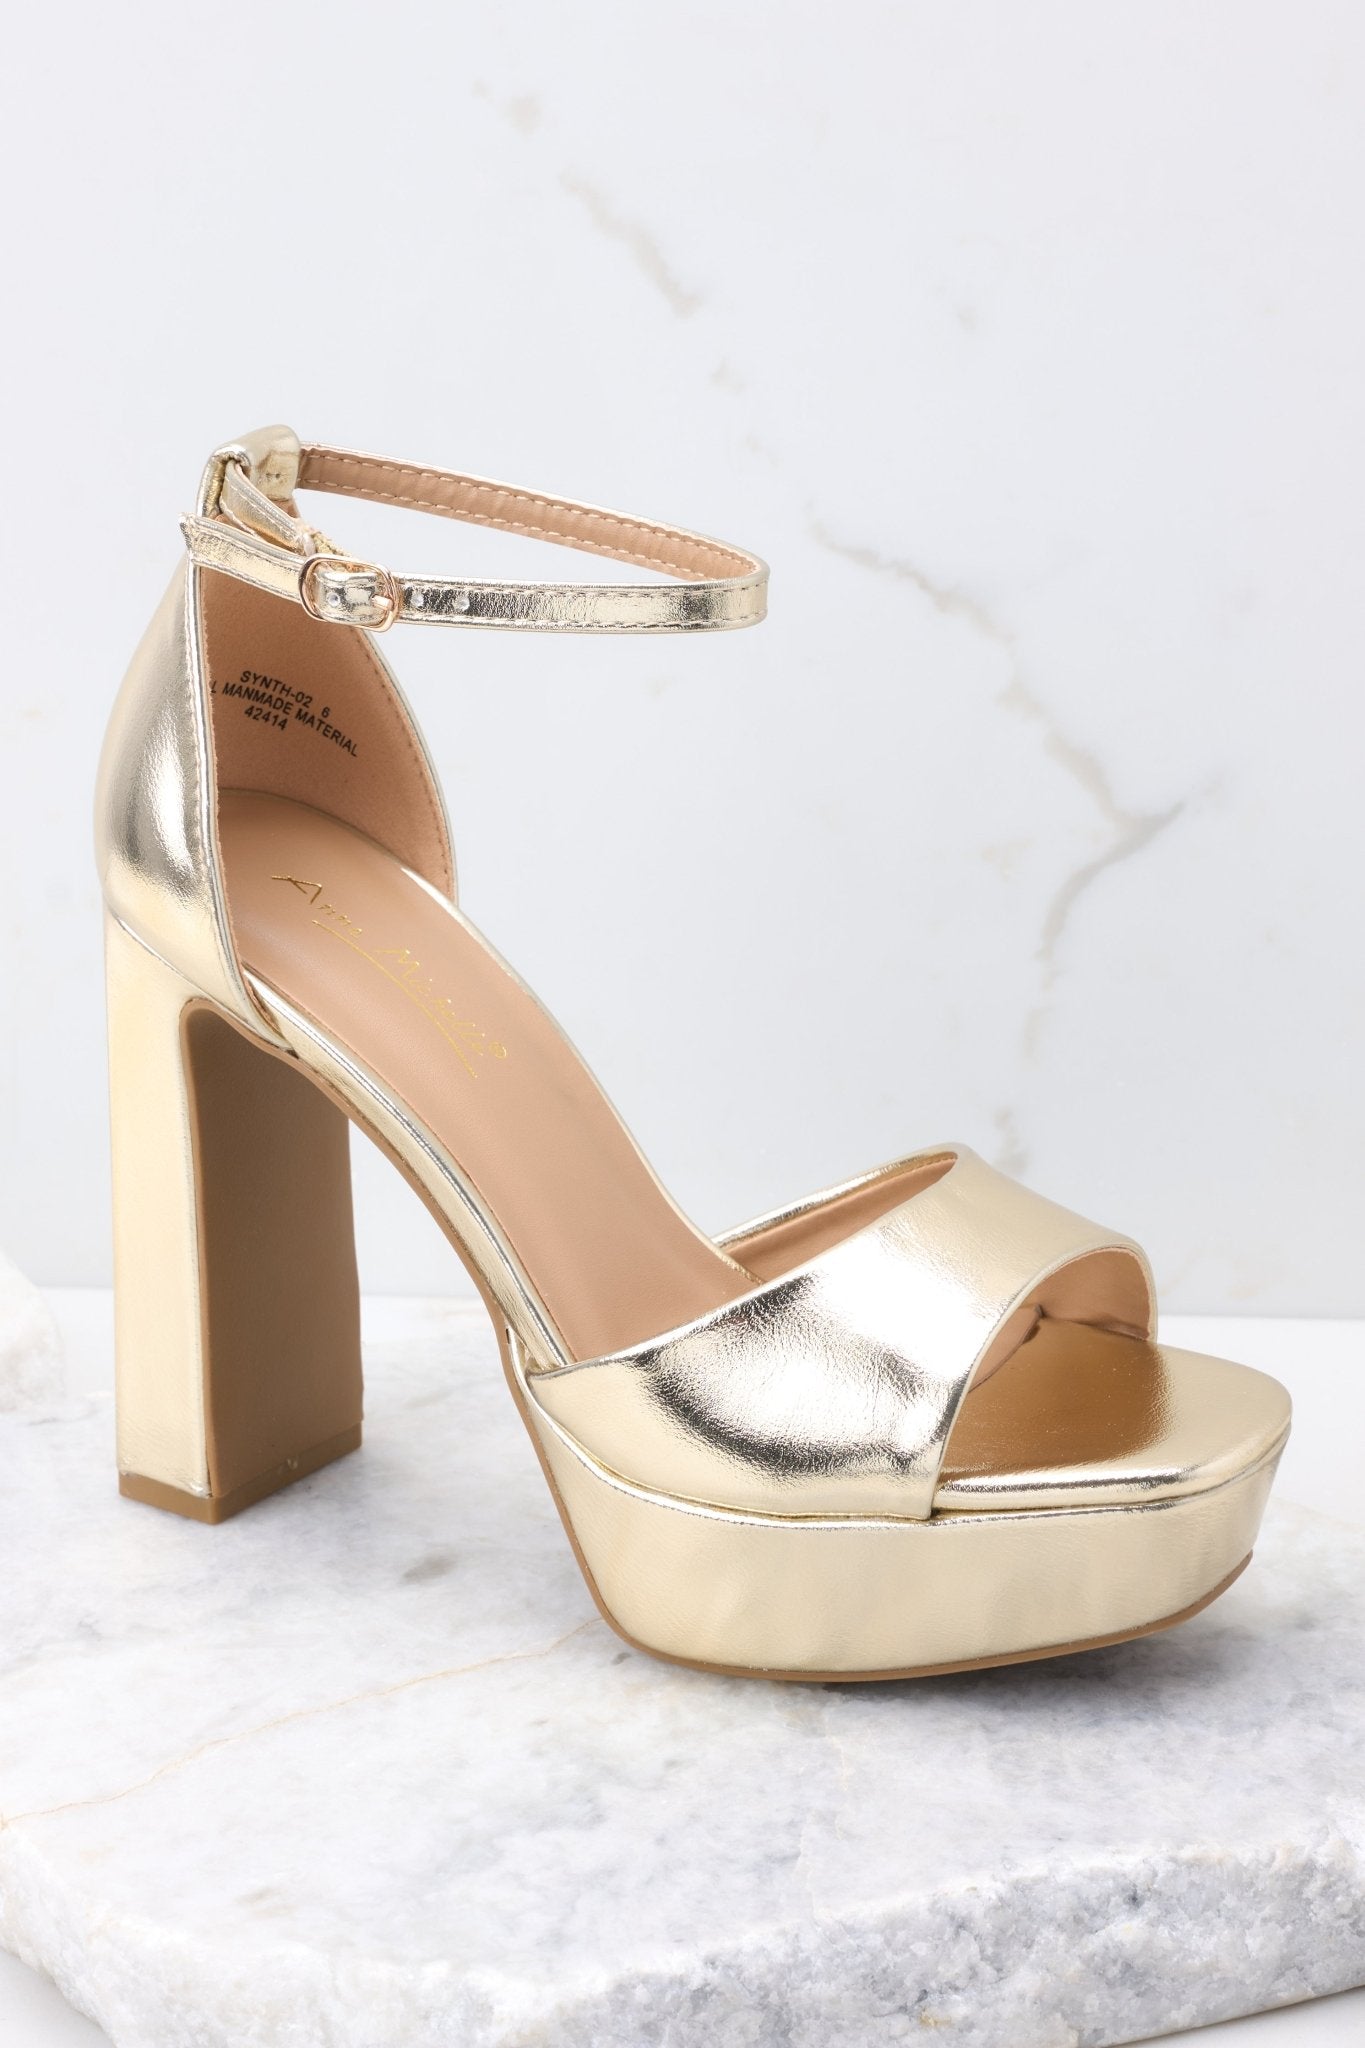 Close up view of these shoes that feature an adjustable ankle strap, a gold strap over the foot, a chucky heel, and a platform style. 